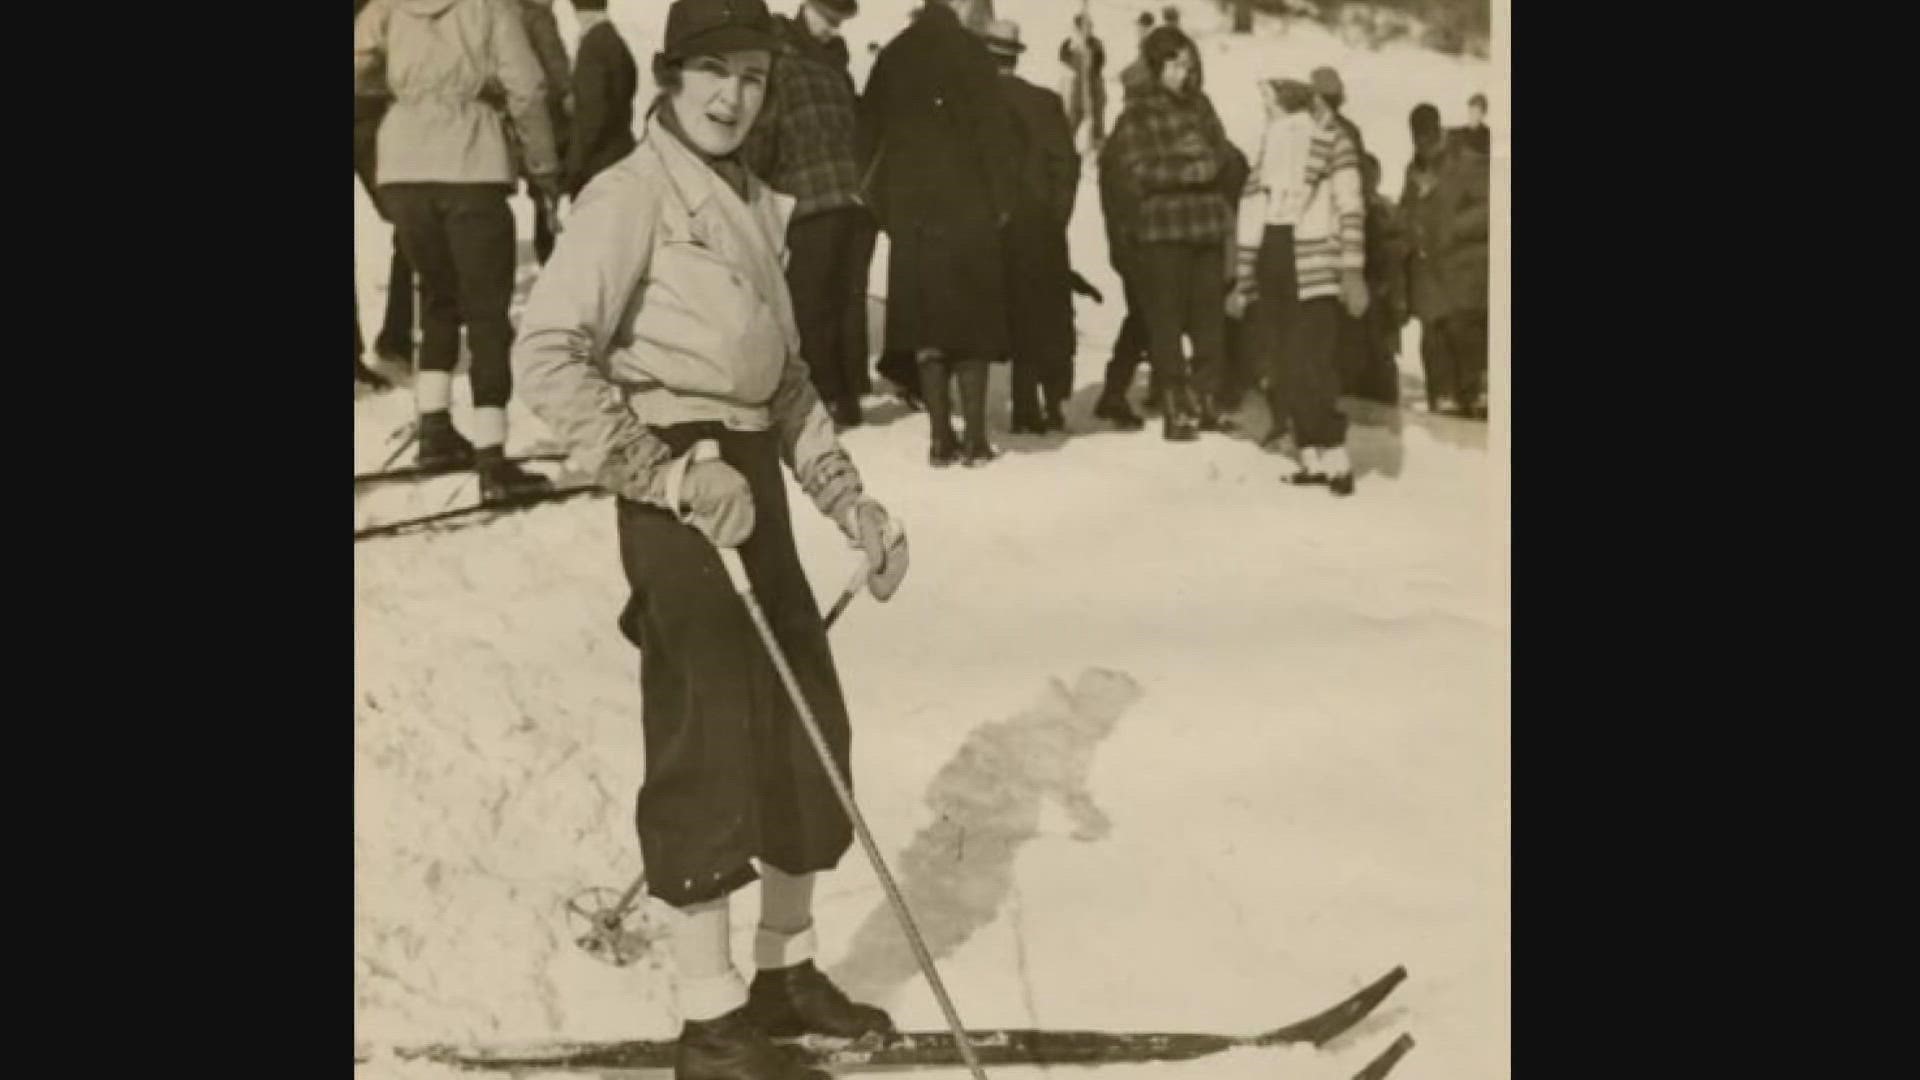 The Maine Ski and Snowboard Museum is hosting a series of lectures called the Cocoa Chronicles exploring the influence Maine has had on the sport.